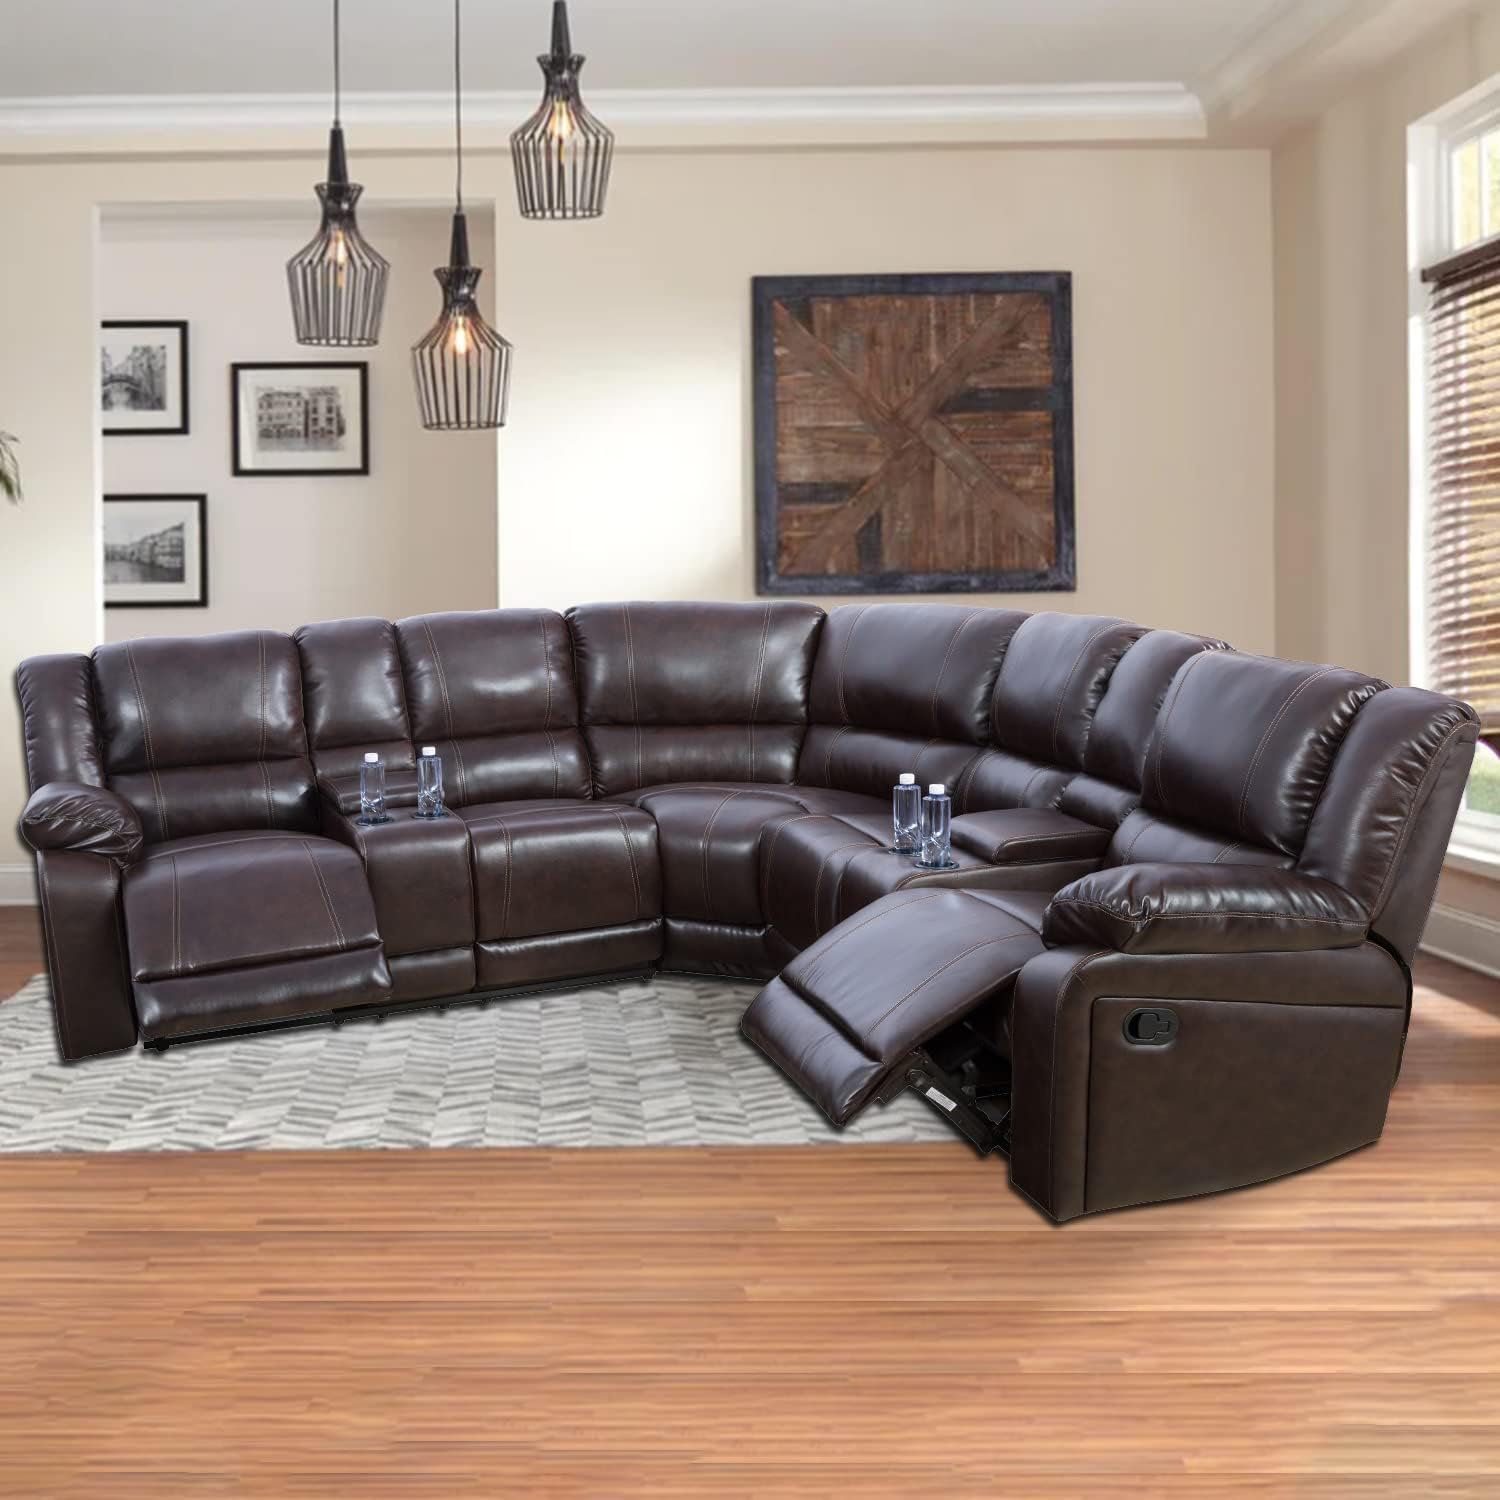 3 Pieces Sectional Sofa Set Manual Recliners with Cup Holders PU Leather Overstuffed Set Brown